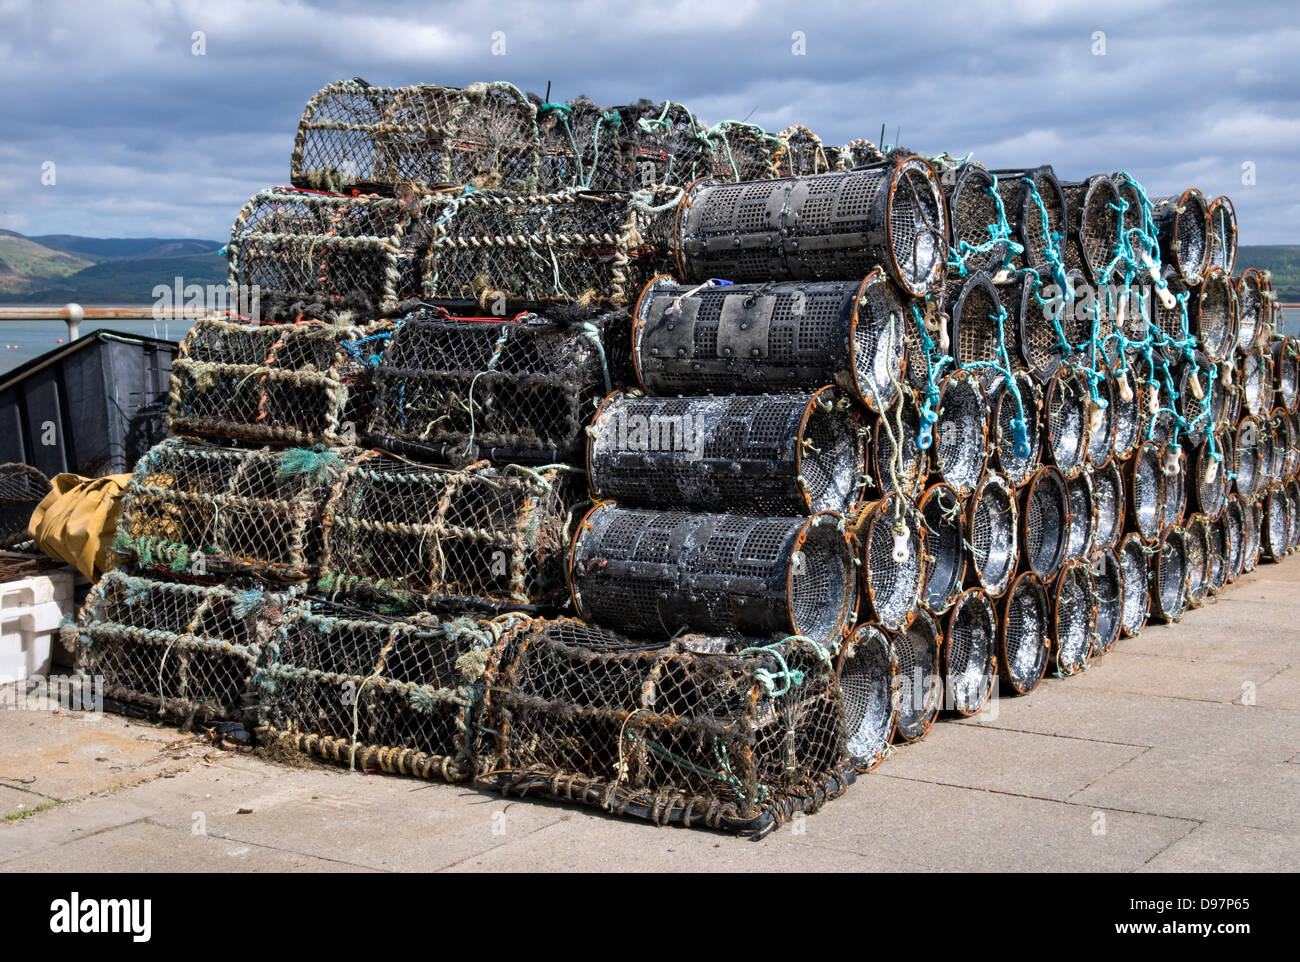 Pile of old lobster and shrimping pots at Aberdovey, Gwynedd, Wales Stock Photo